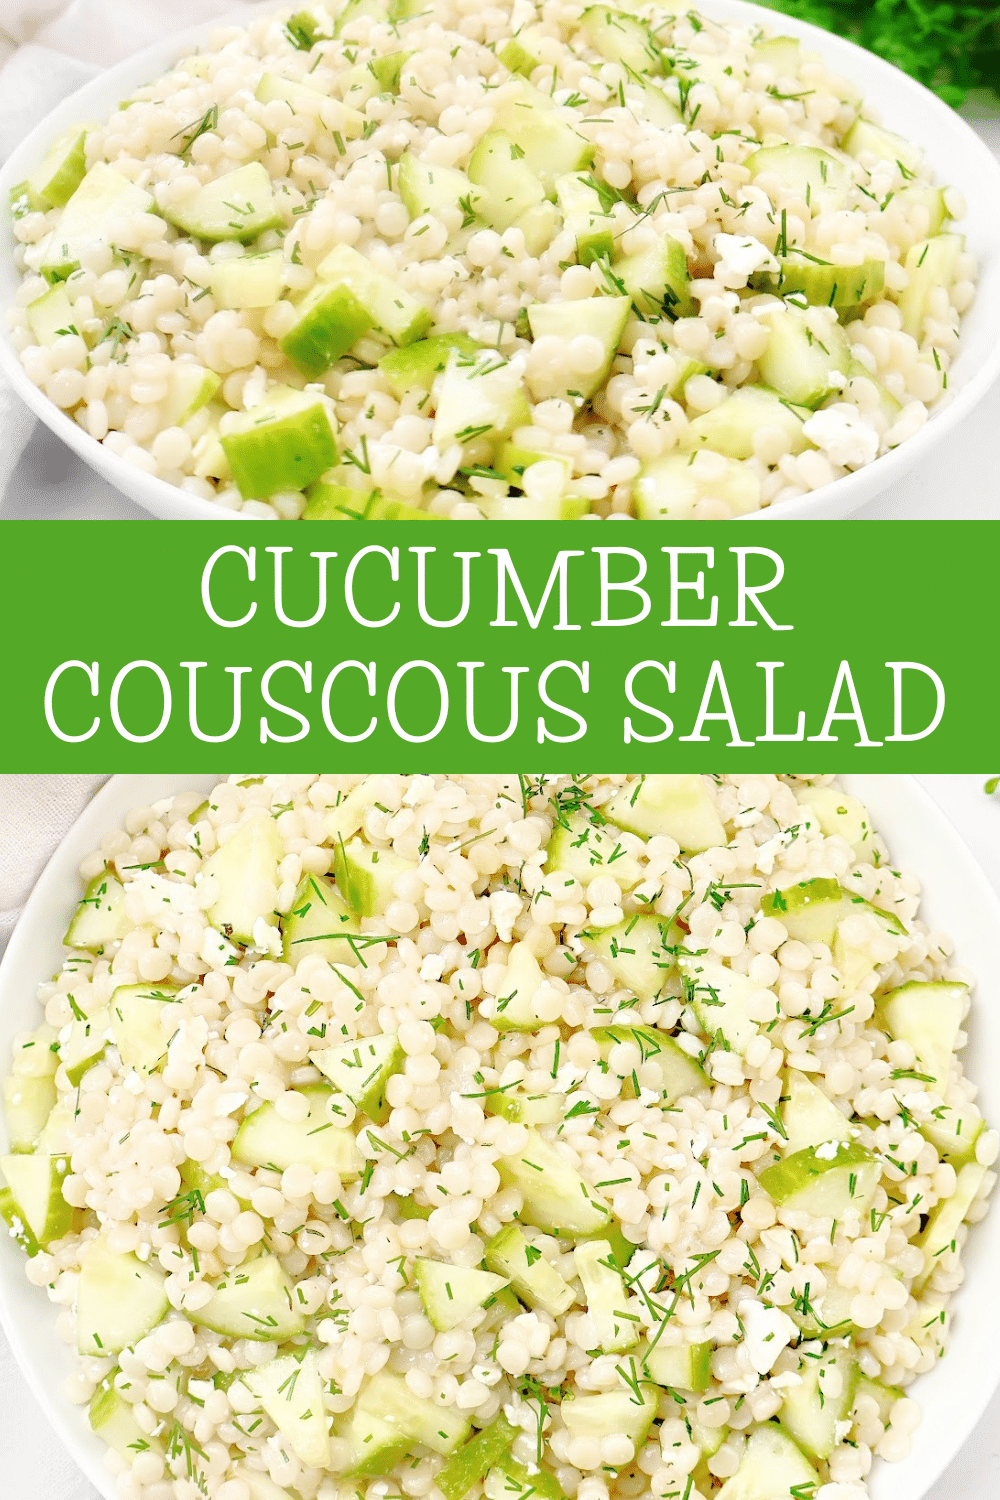 Cucumber Couscous Salad ~ Pearled couscous salad with crisp cucumber, fresh dill, and tangy feta tossed in zesty Italian dressing. via @thiswifecooks